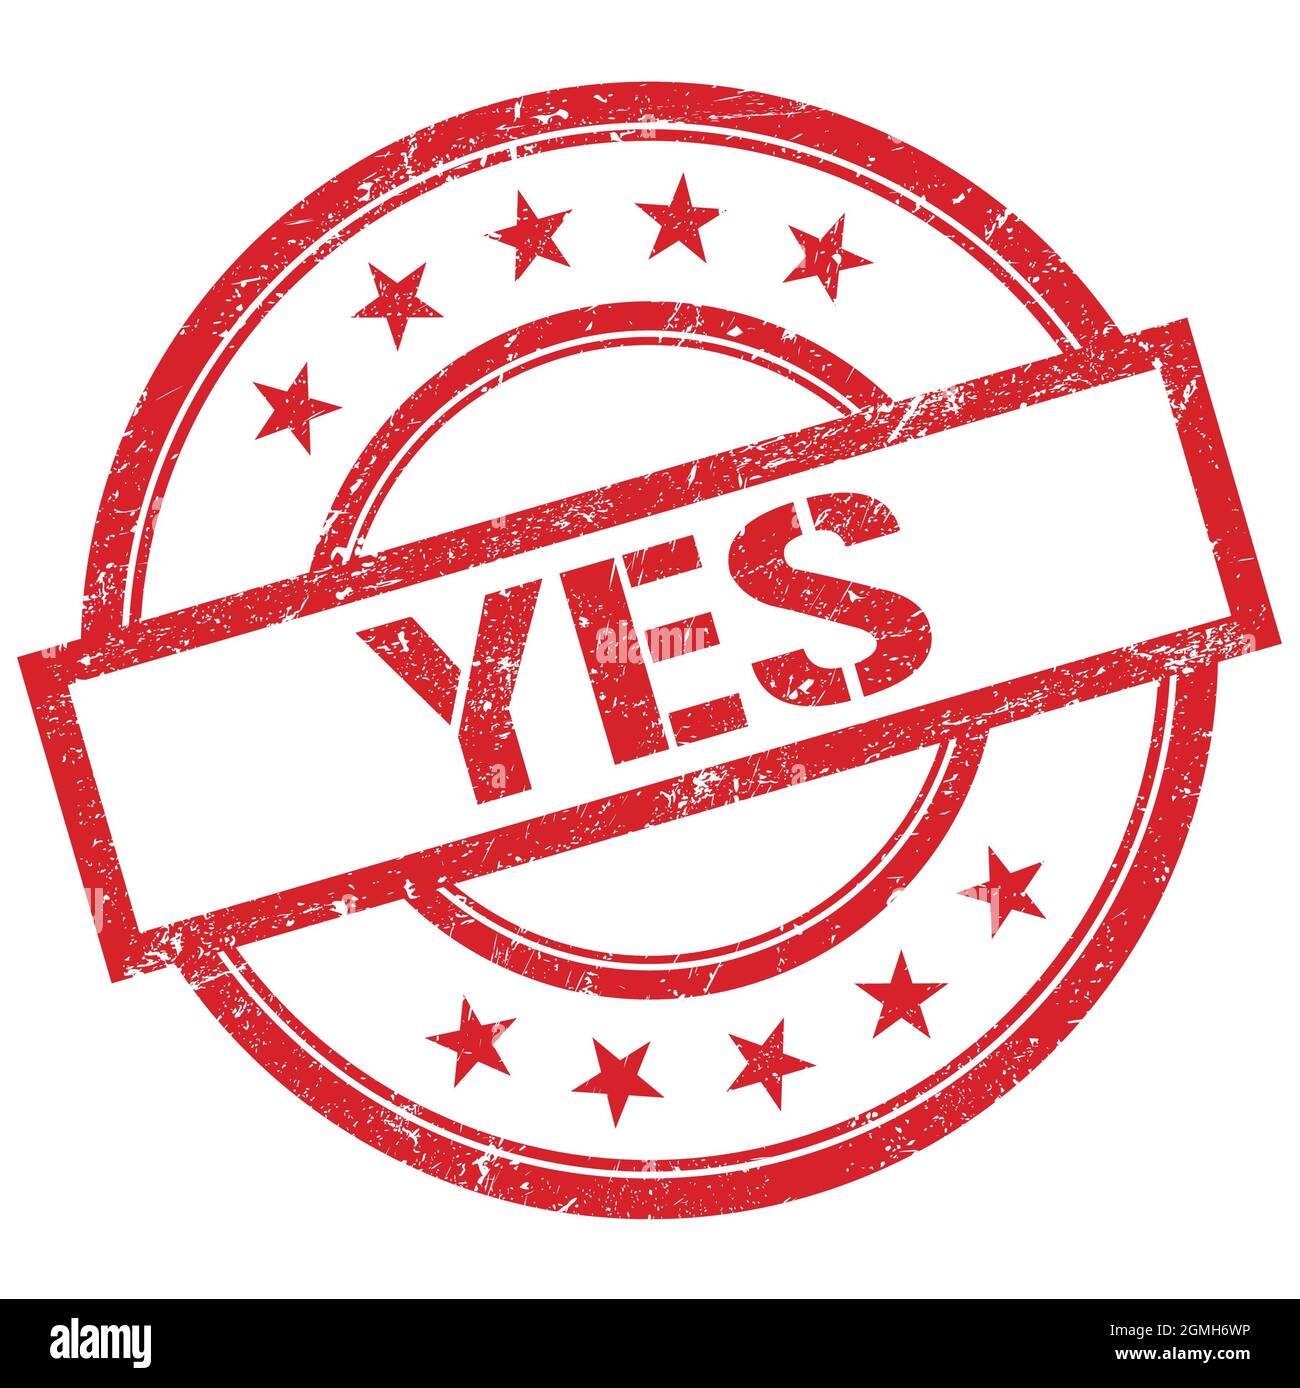 YES text written on red round vintage rubber stamp. Stock Photo